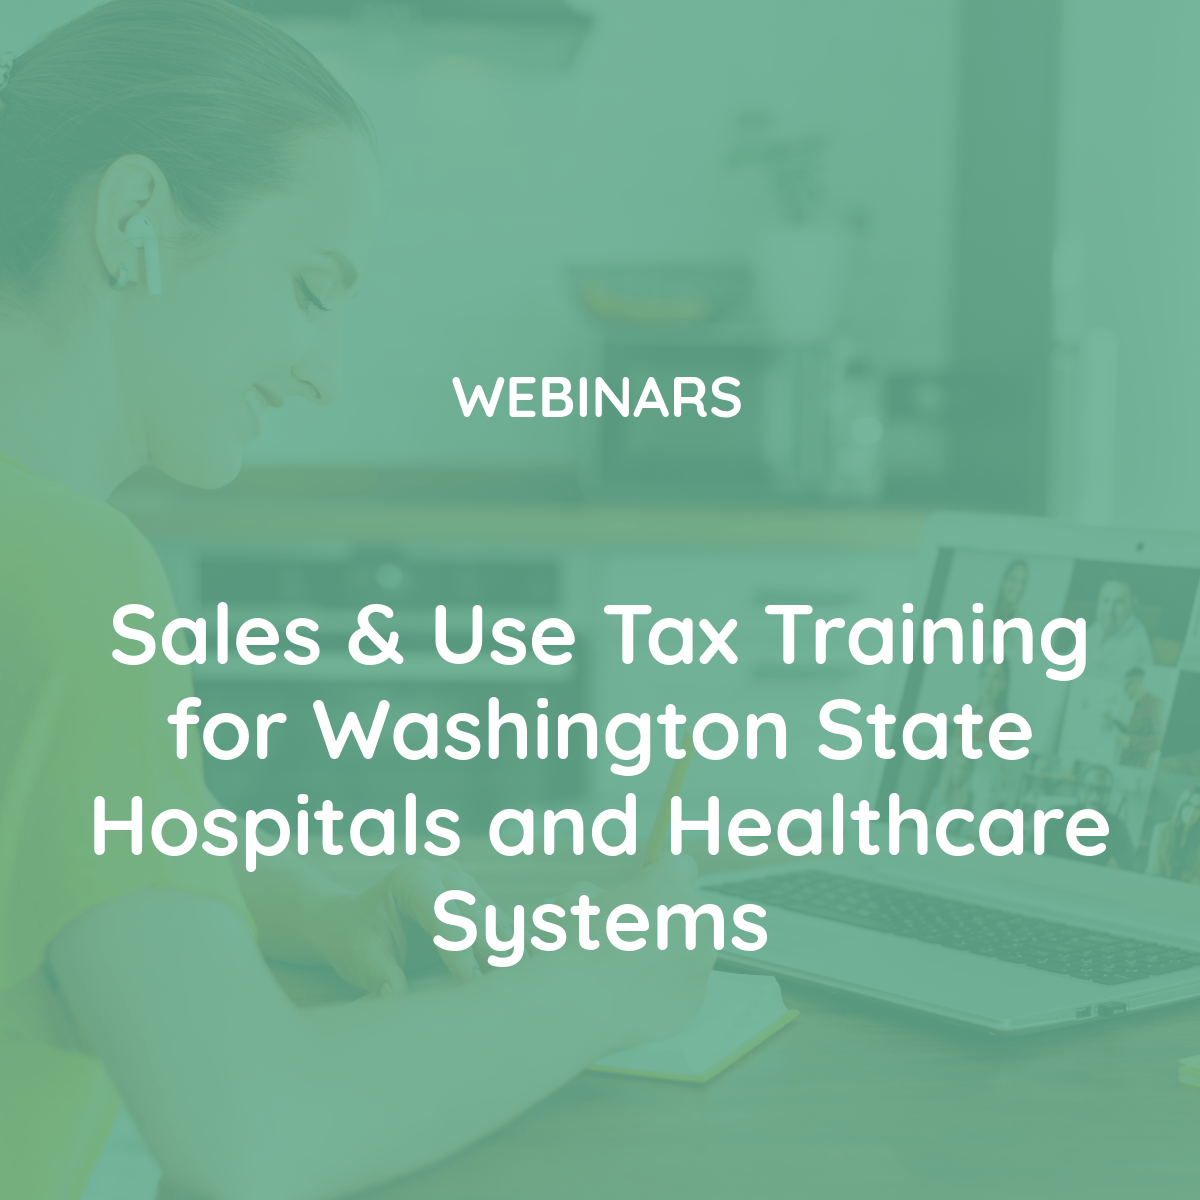 Sales & Use Tax Training for Washington State Hospitals and Healthcare Systems